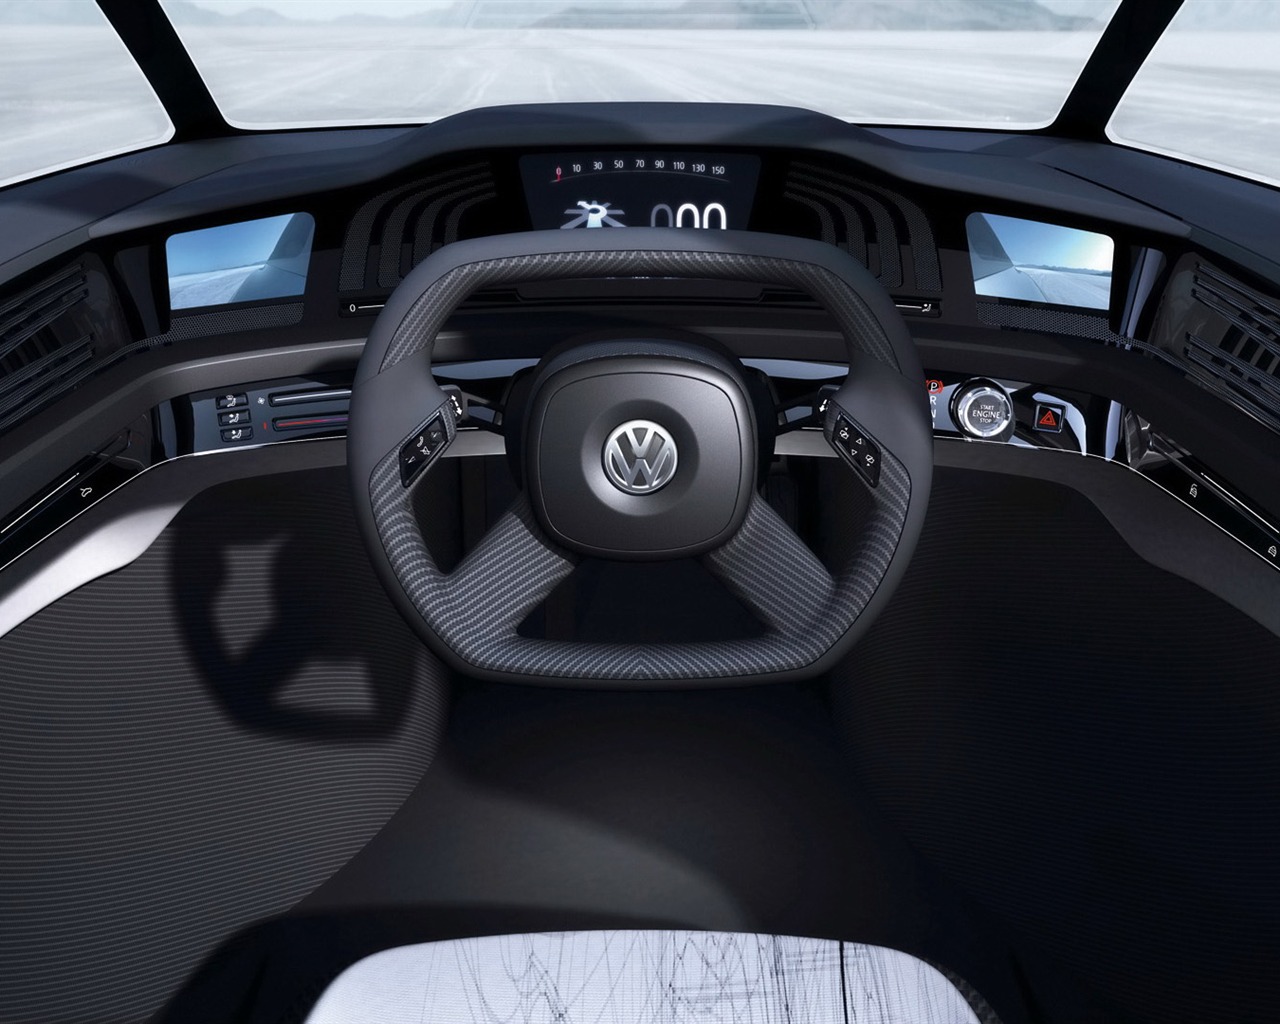 Volkswagen L1 Tapety Concept Car #5 - 1280x1024